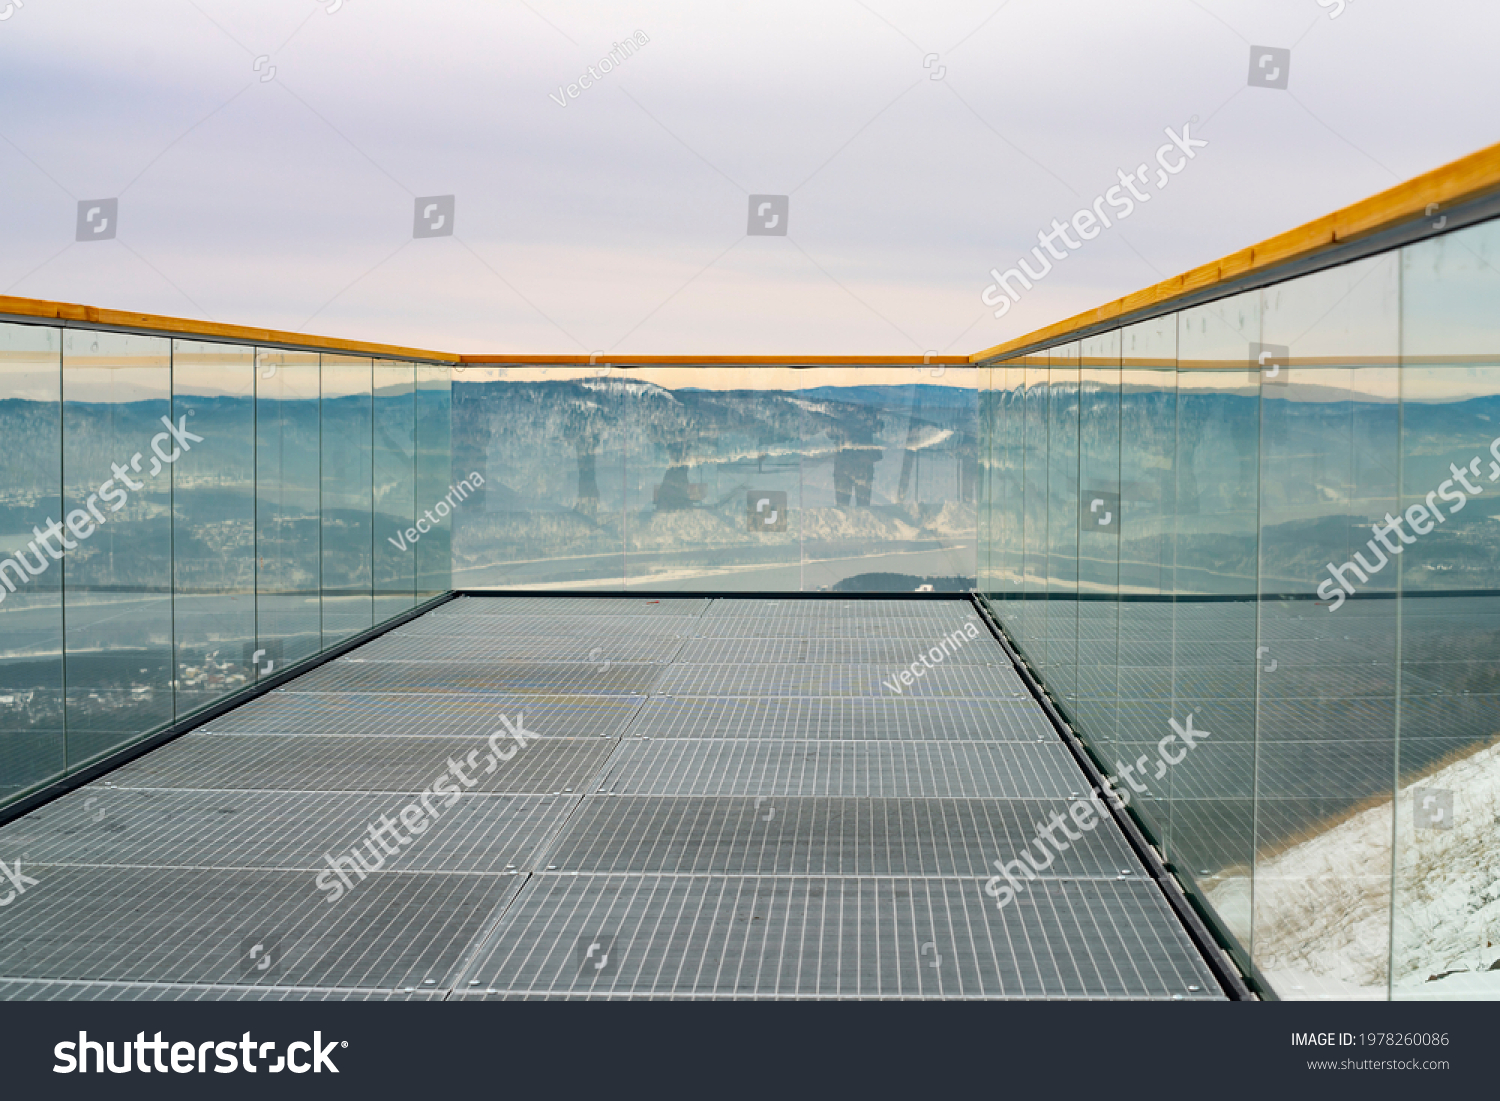 Observation deck with transparent glass railing and wooden railings. Observation deck canopy from the mountainside with mountain views. #1978260086